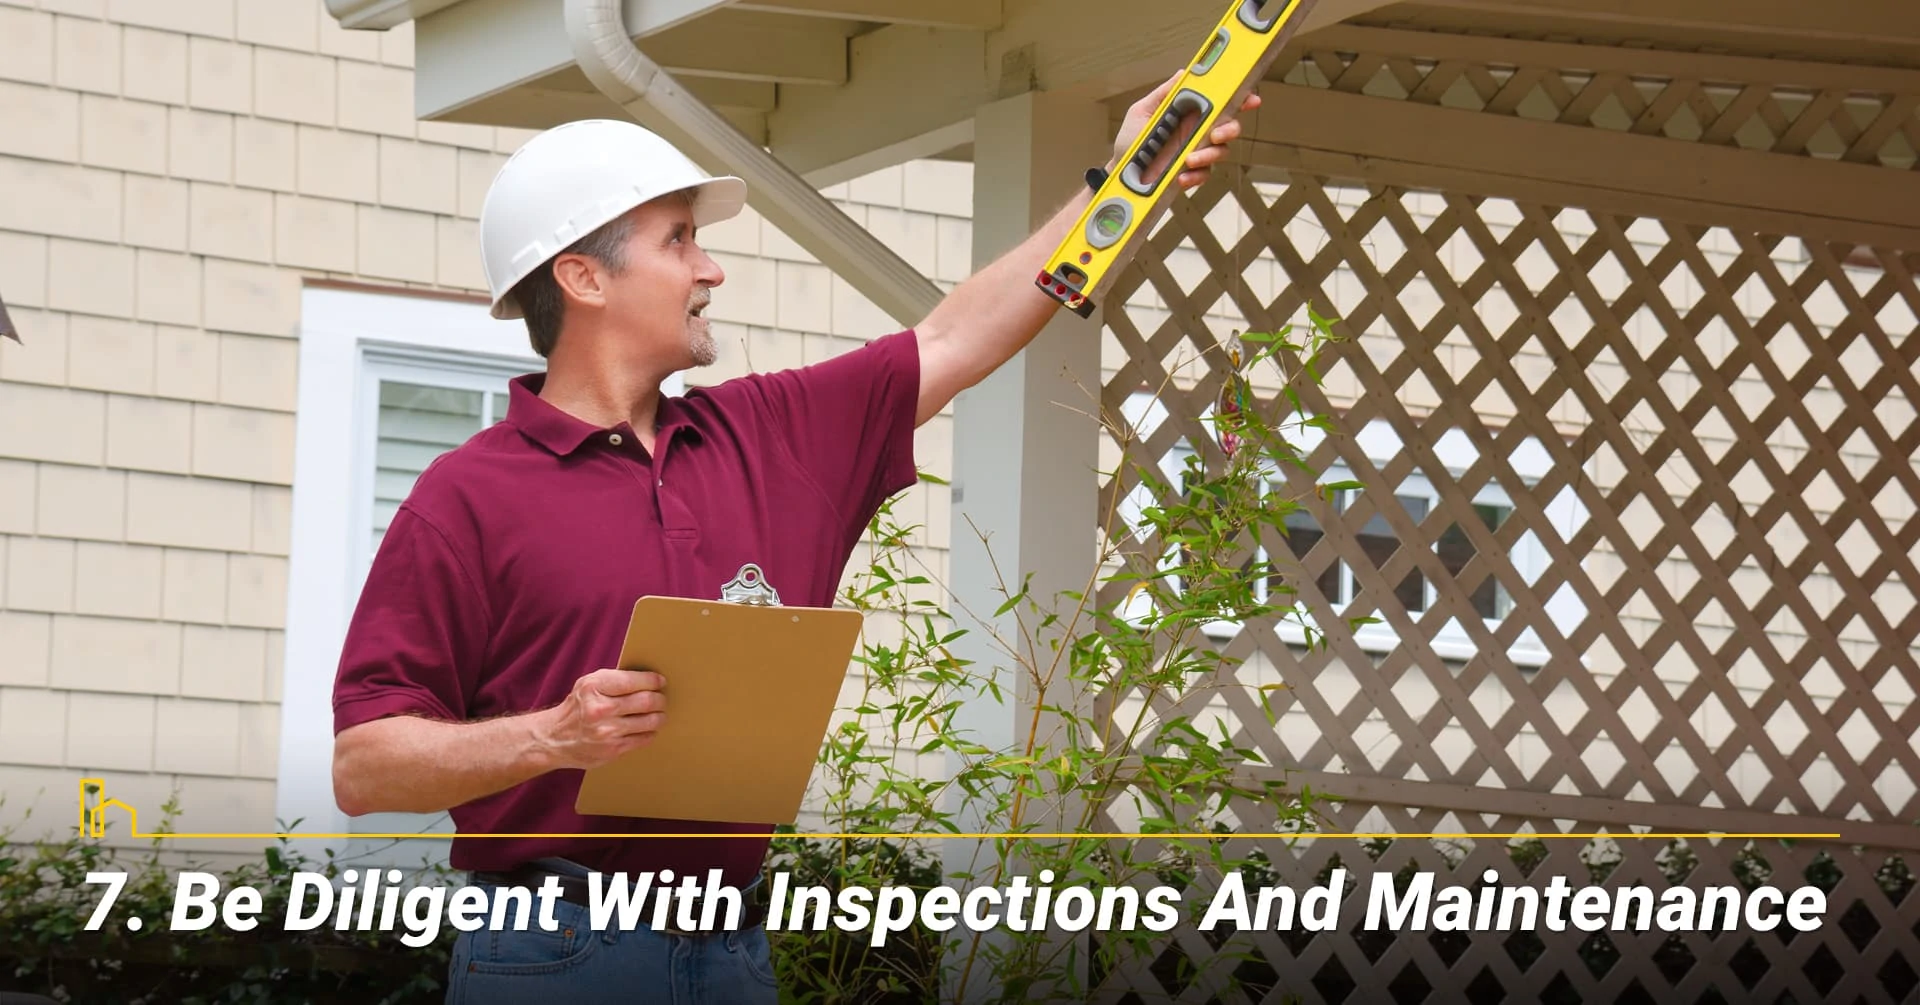 Be Diligent with Inspections and Maintenance, inspect and maintain your home well